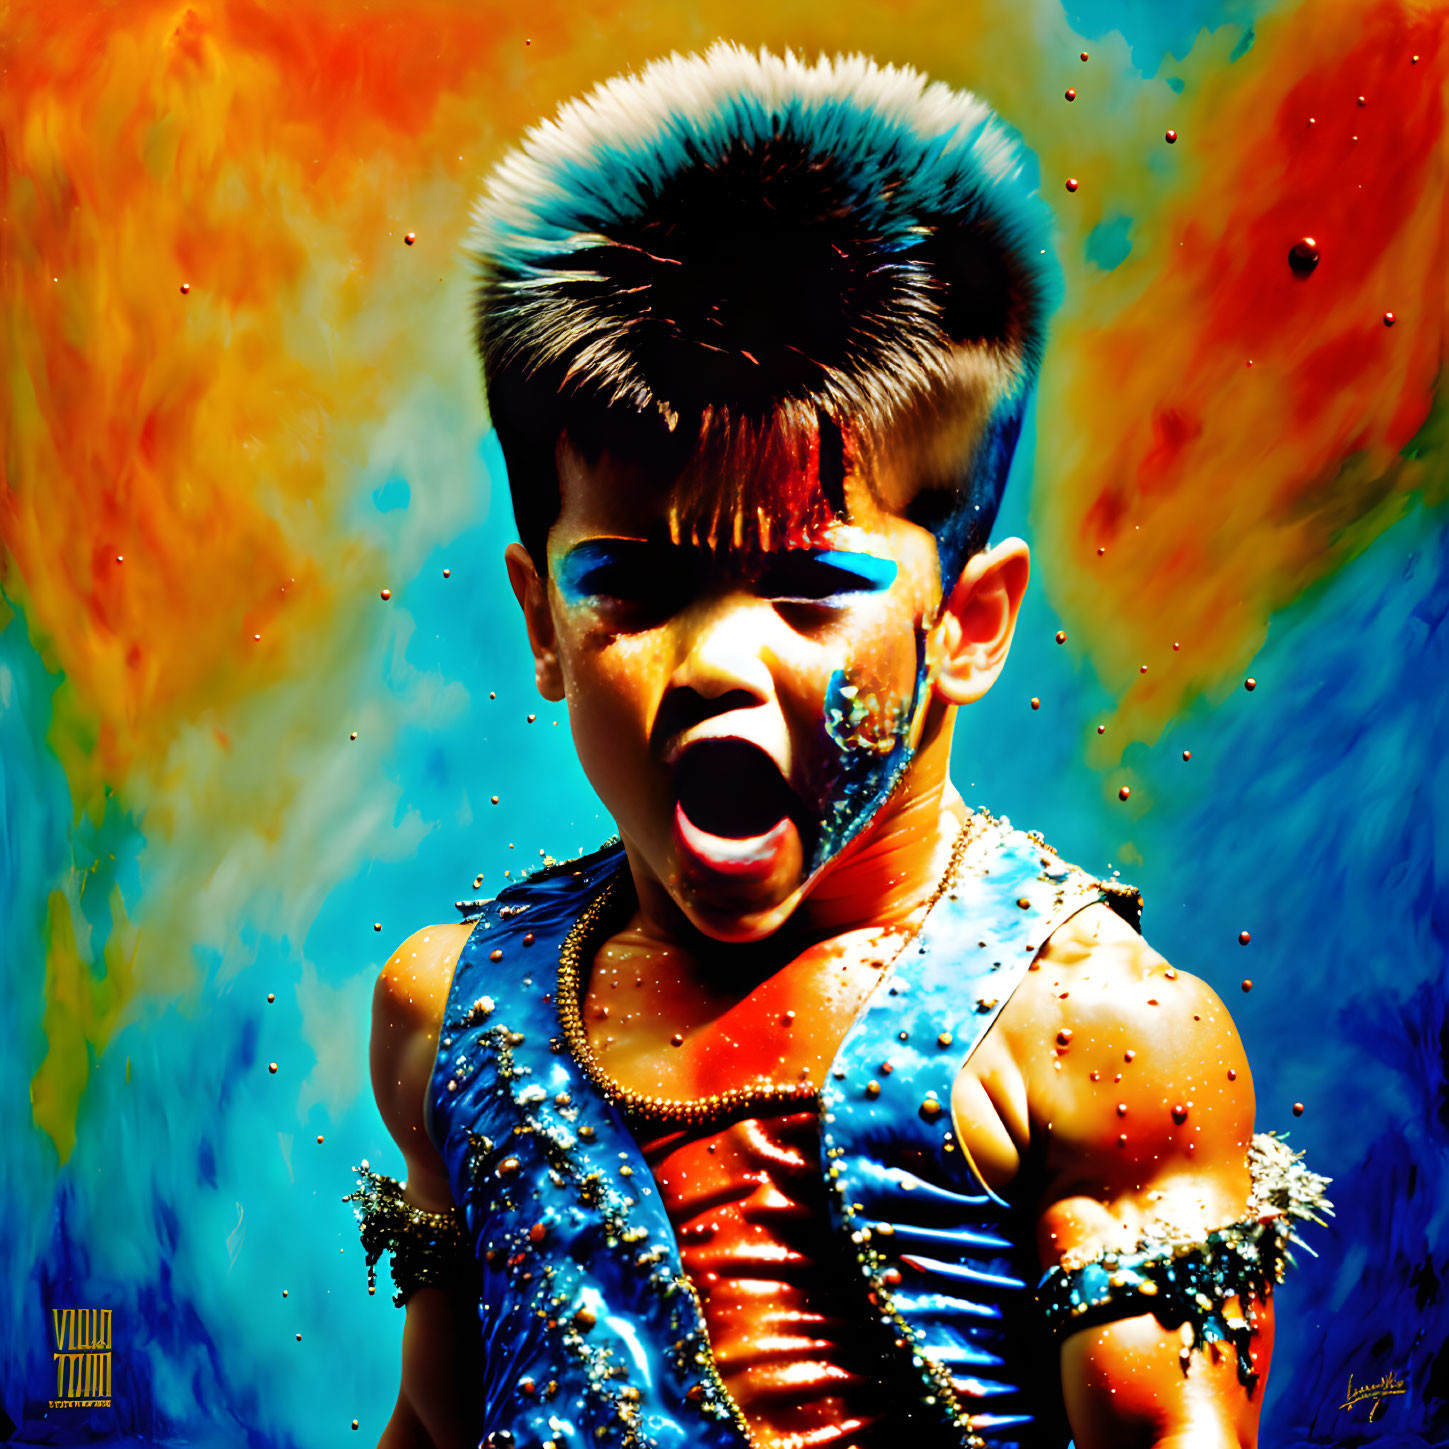 Colorful Child Artwork Featuring Face Paint and Mohawk Costume